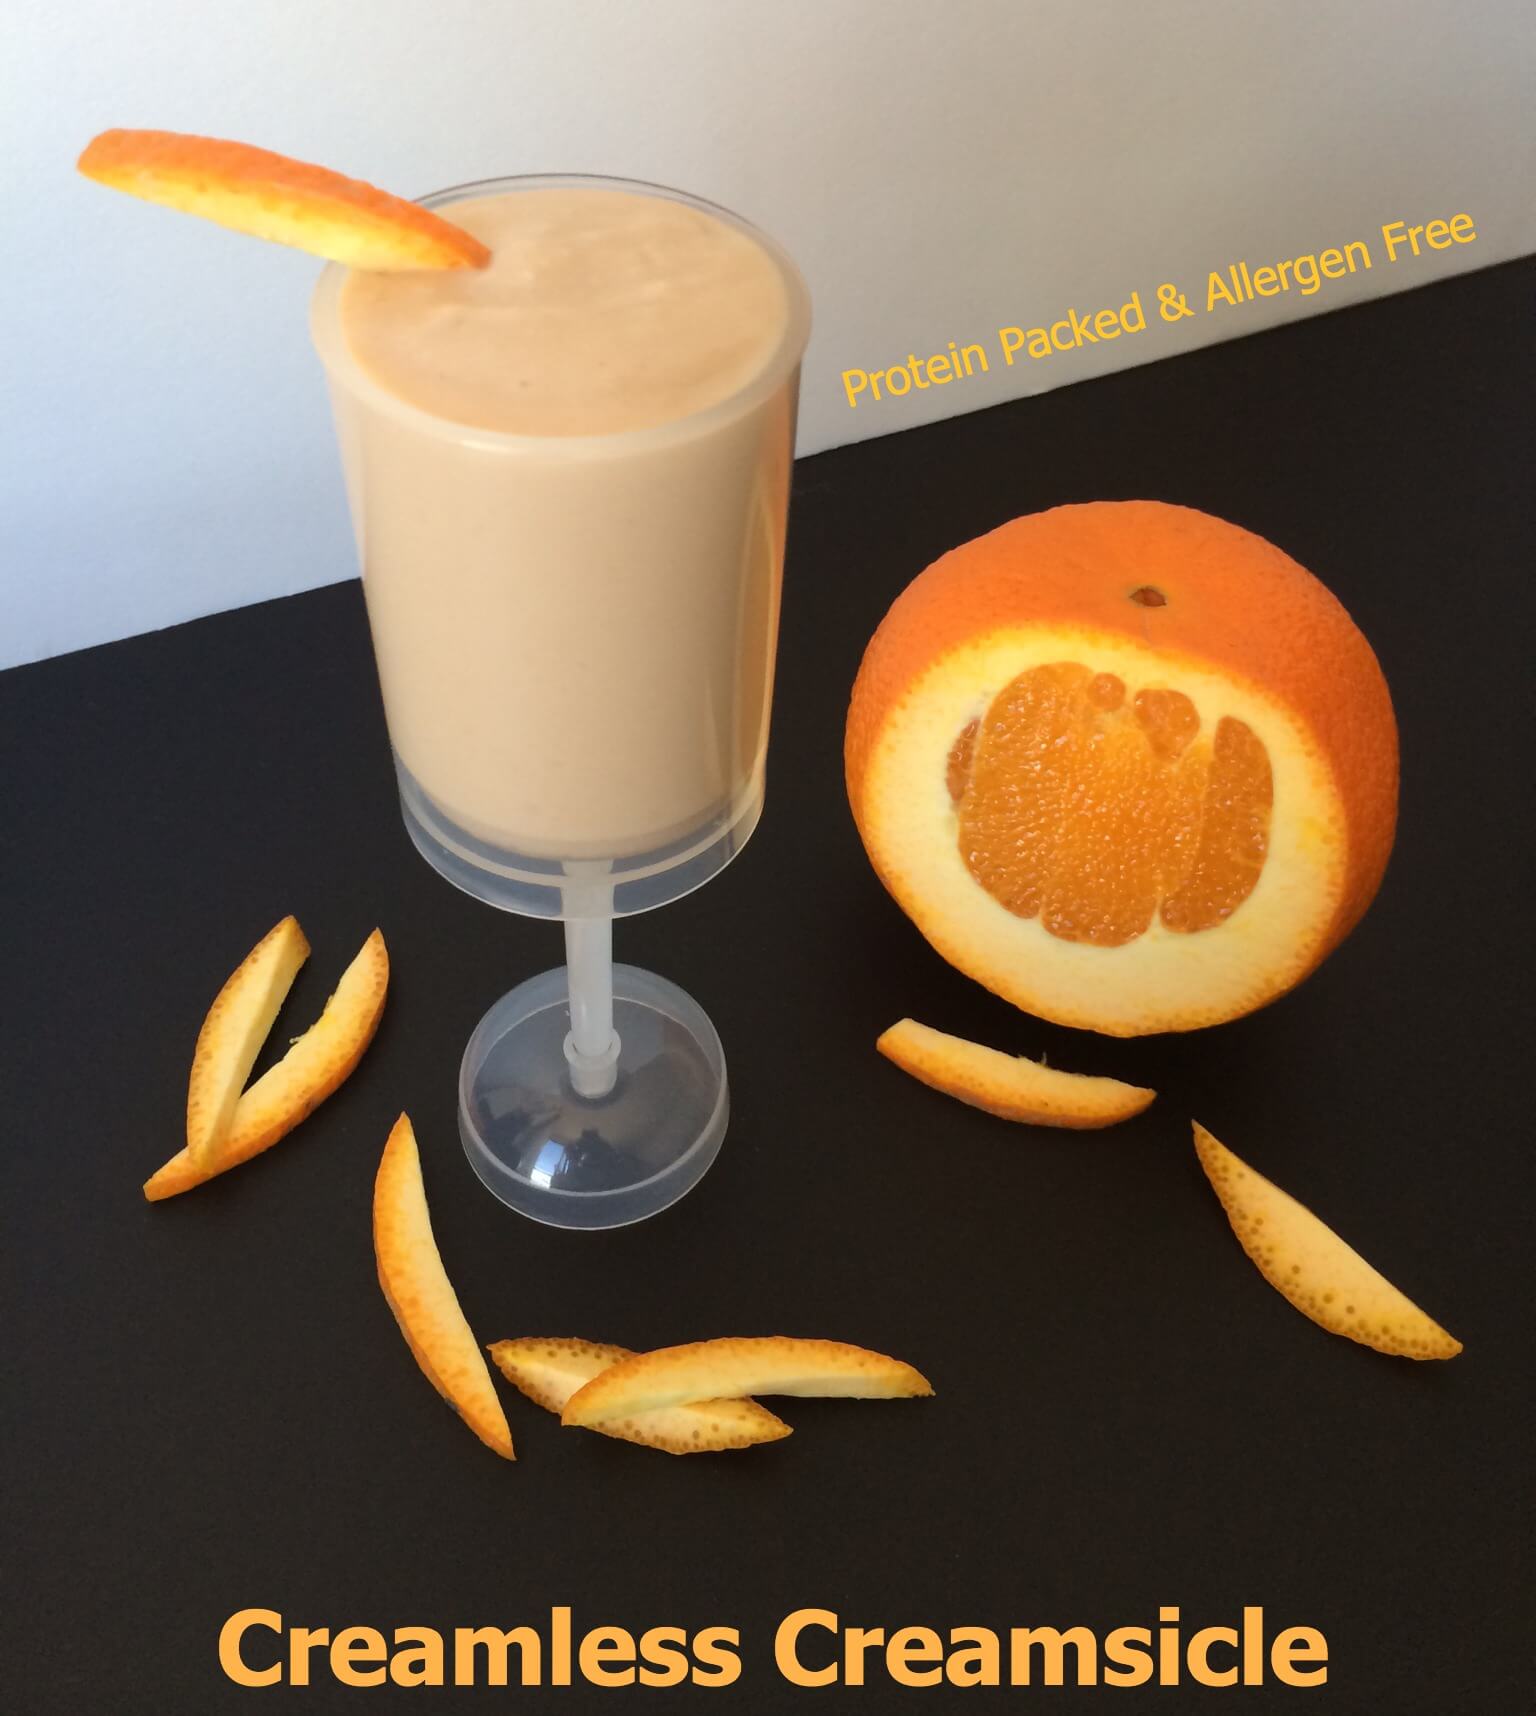 Healthy protein packed creamsicle recipe